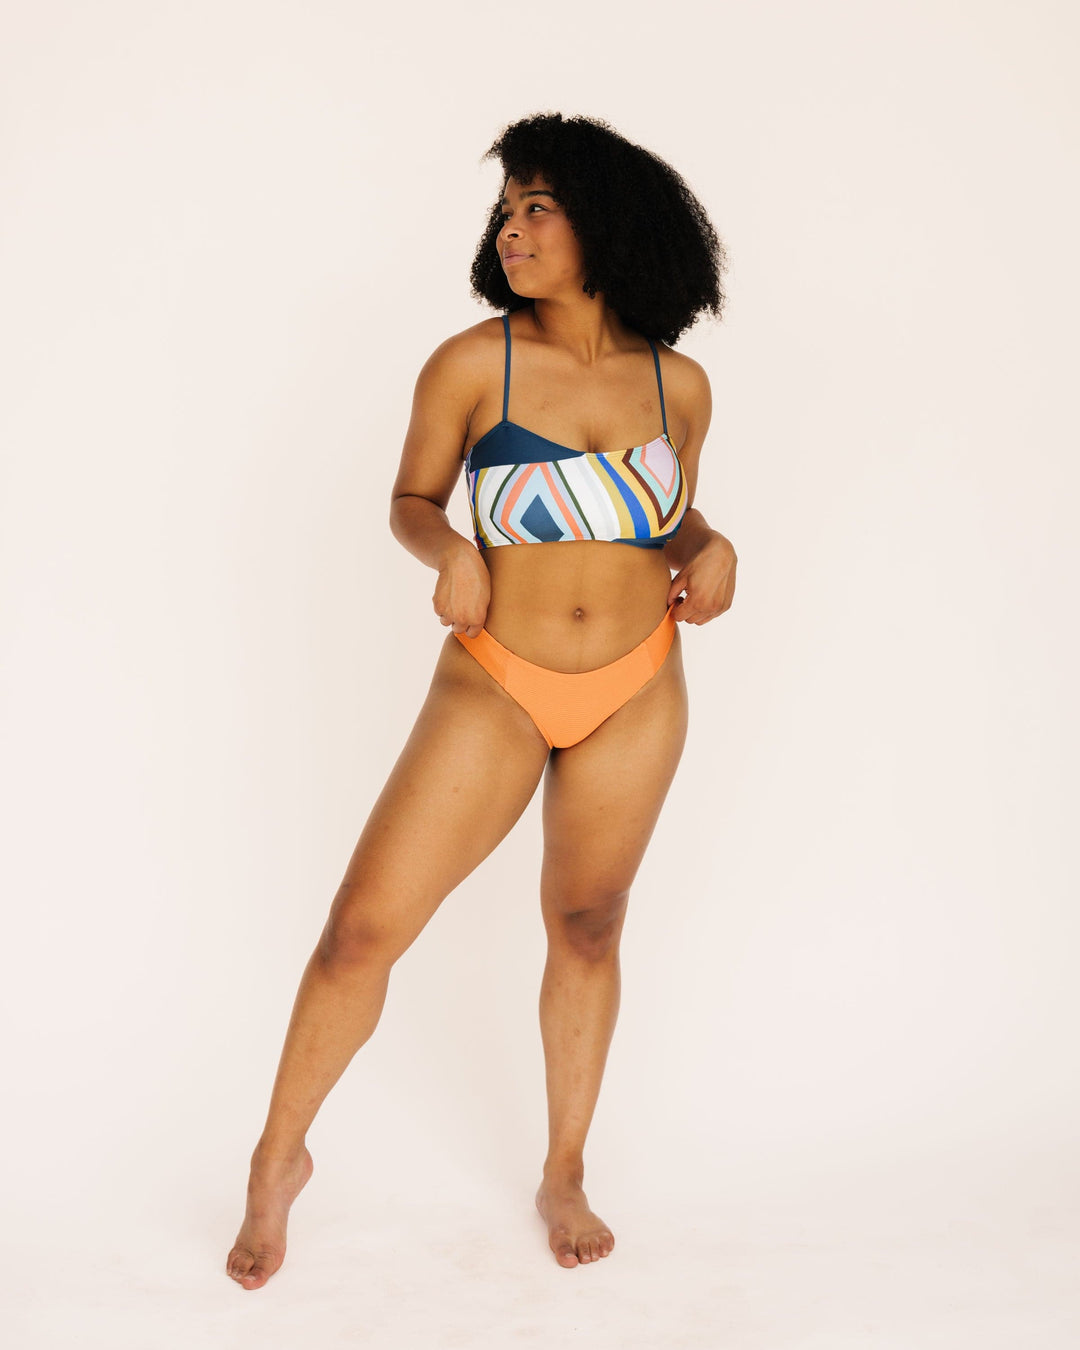 Full body Front view Studio picture of a girl wearing textured orange bikini bottoms